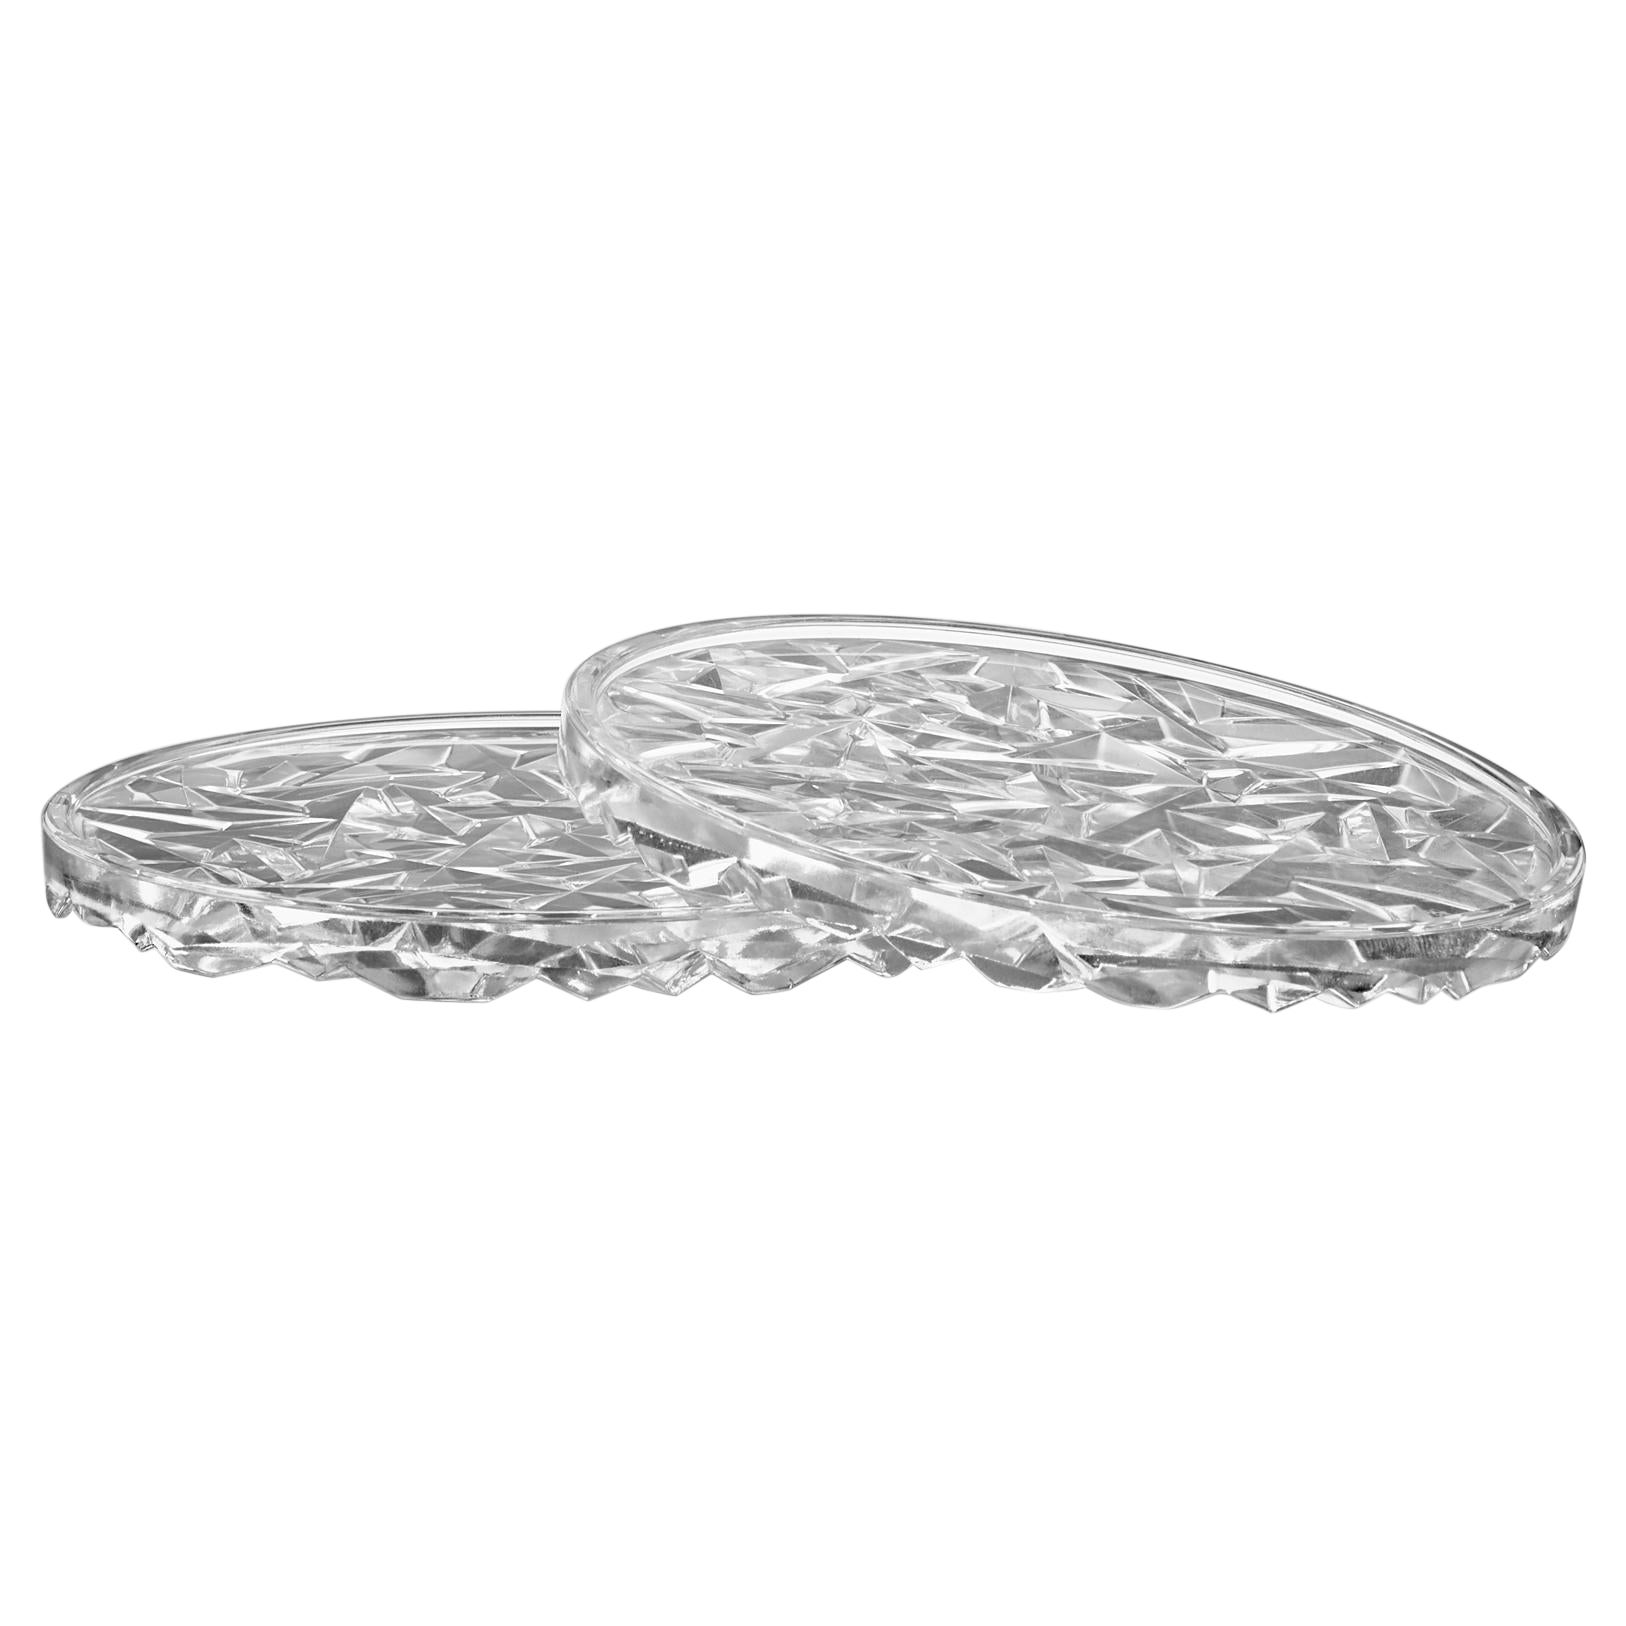 Orrefors Carat Coaster Small 2-Pack For Sale